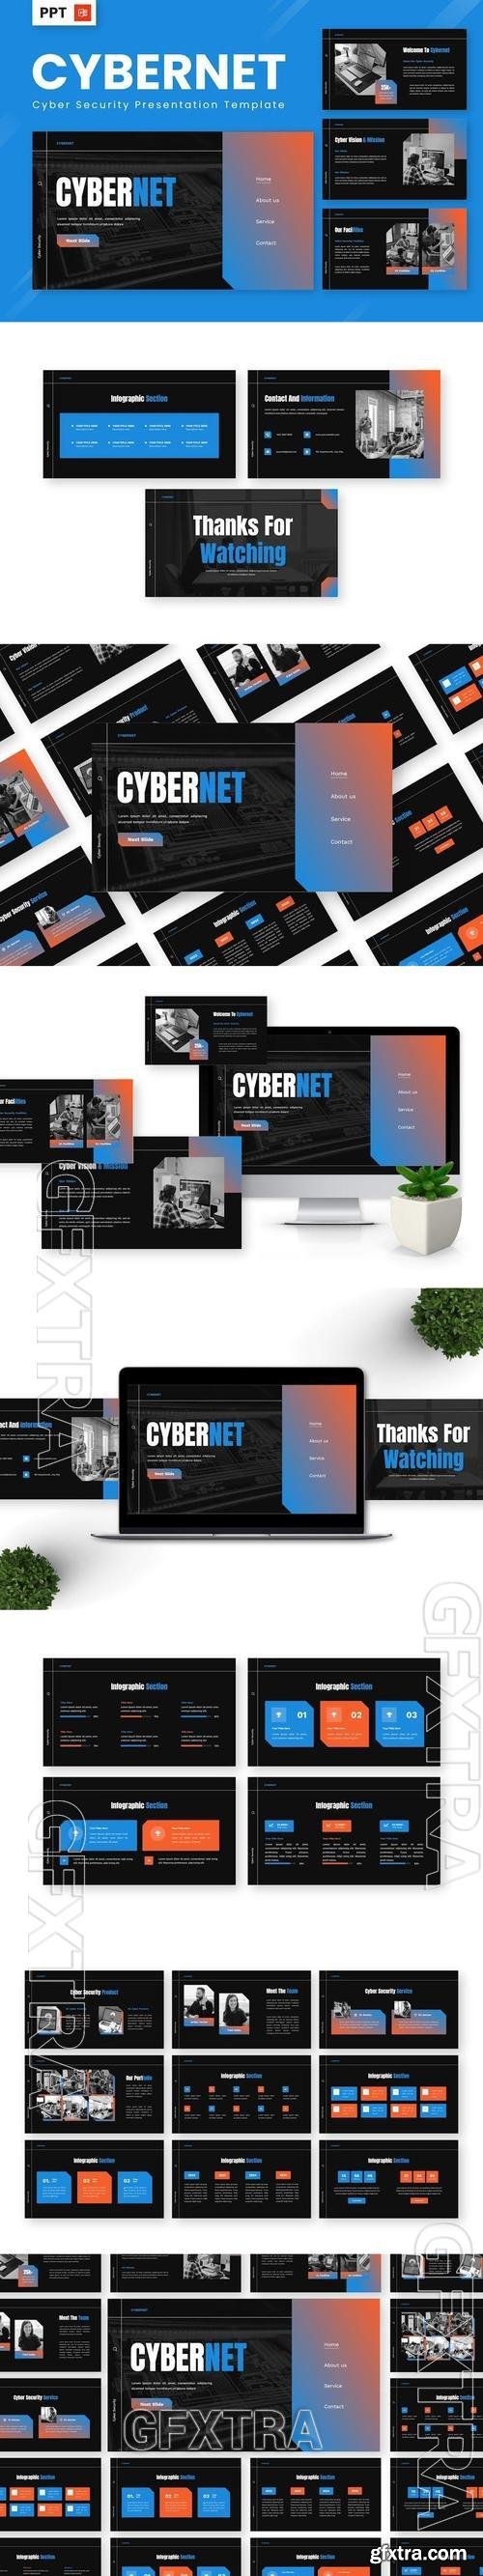 Cybernet - Cyber Security Powerpoint Templates P7YB9T5